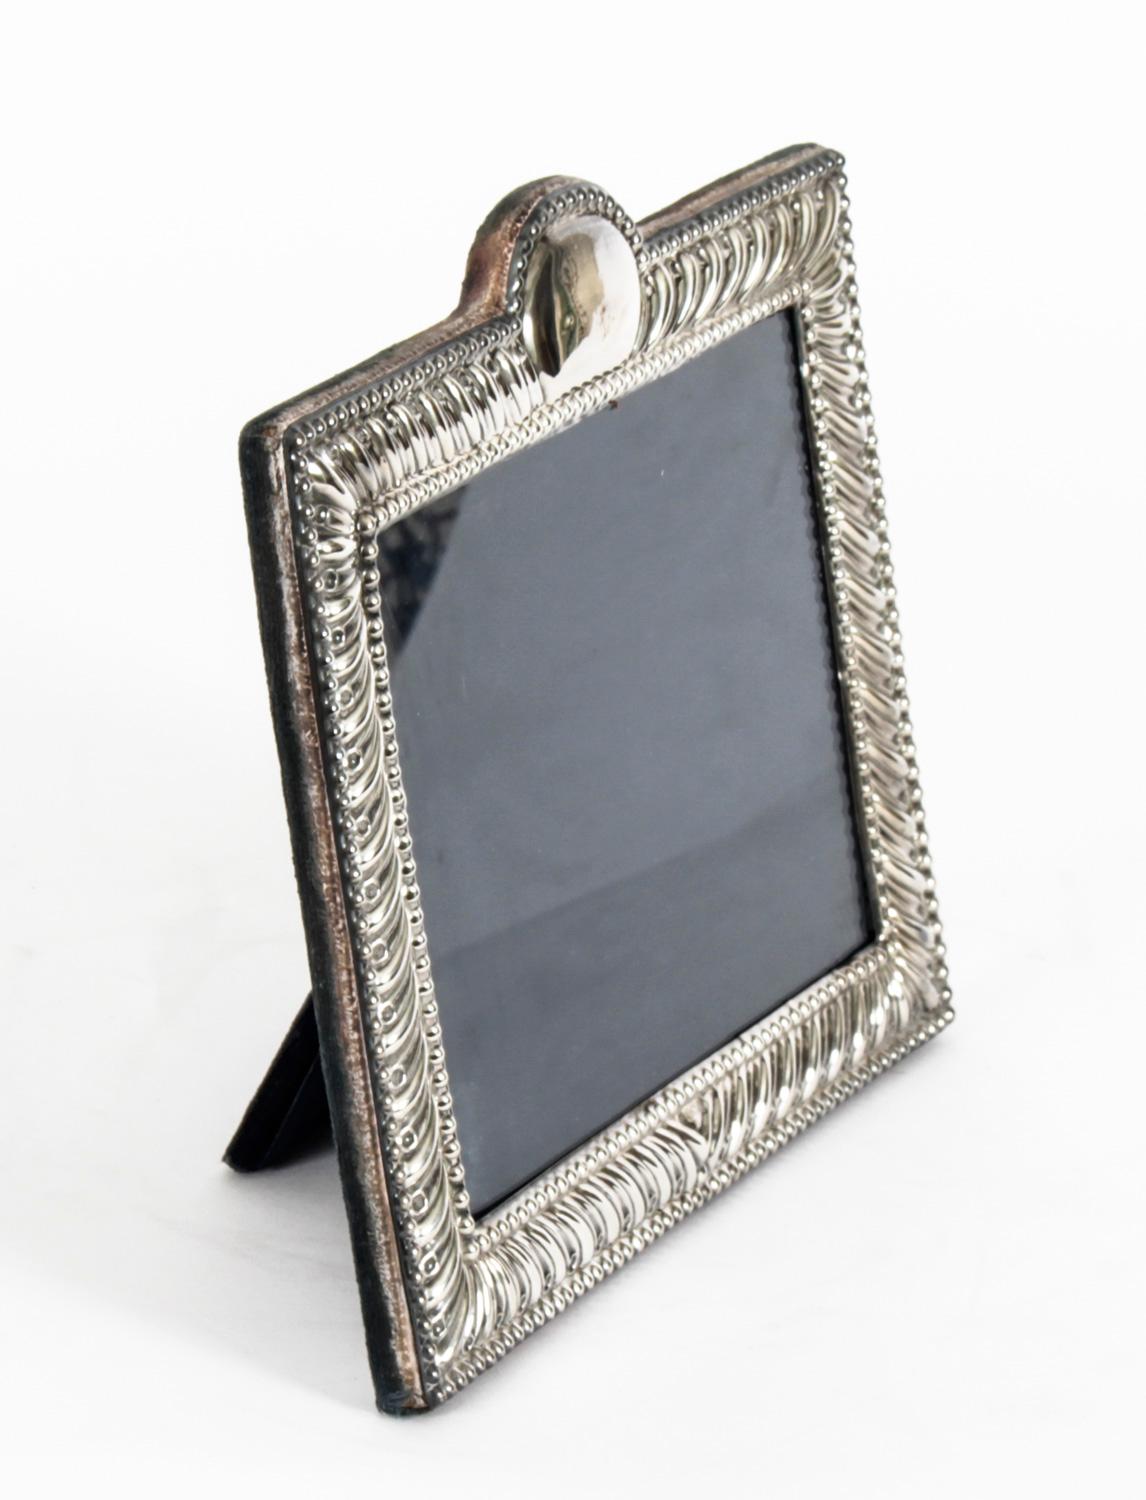 A truly superb vintage sterling silver photo frame bearing the makers mark of Carrs of Sheffield and hallmarks for Sheffield 1986.

The vertical frame has a black velvet back with rectangular border decorated with fluted floral design with beaded